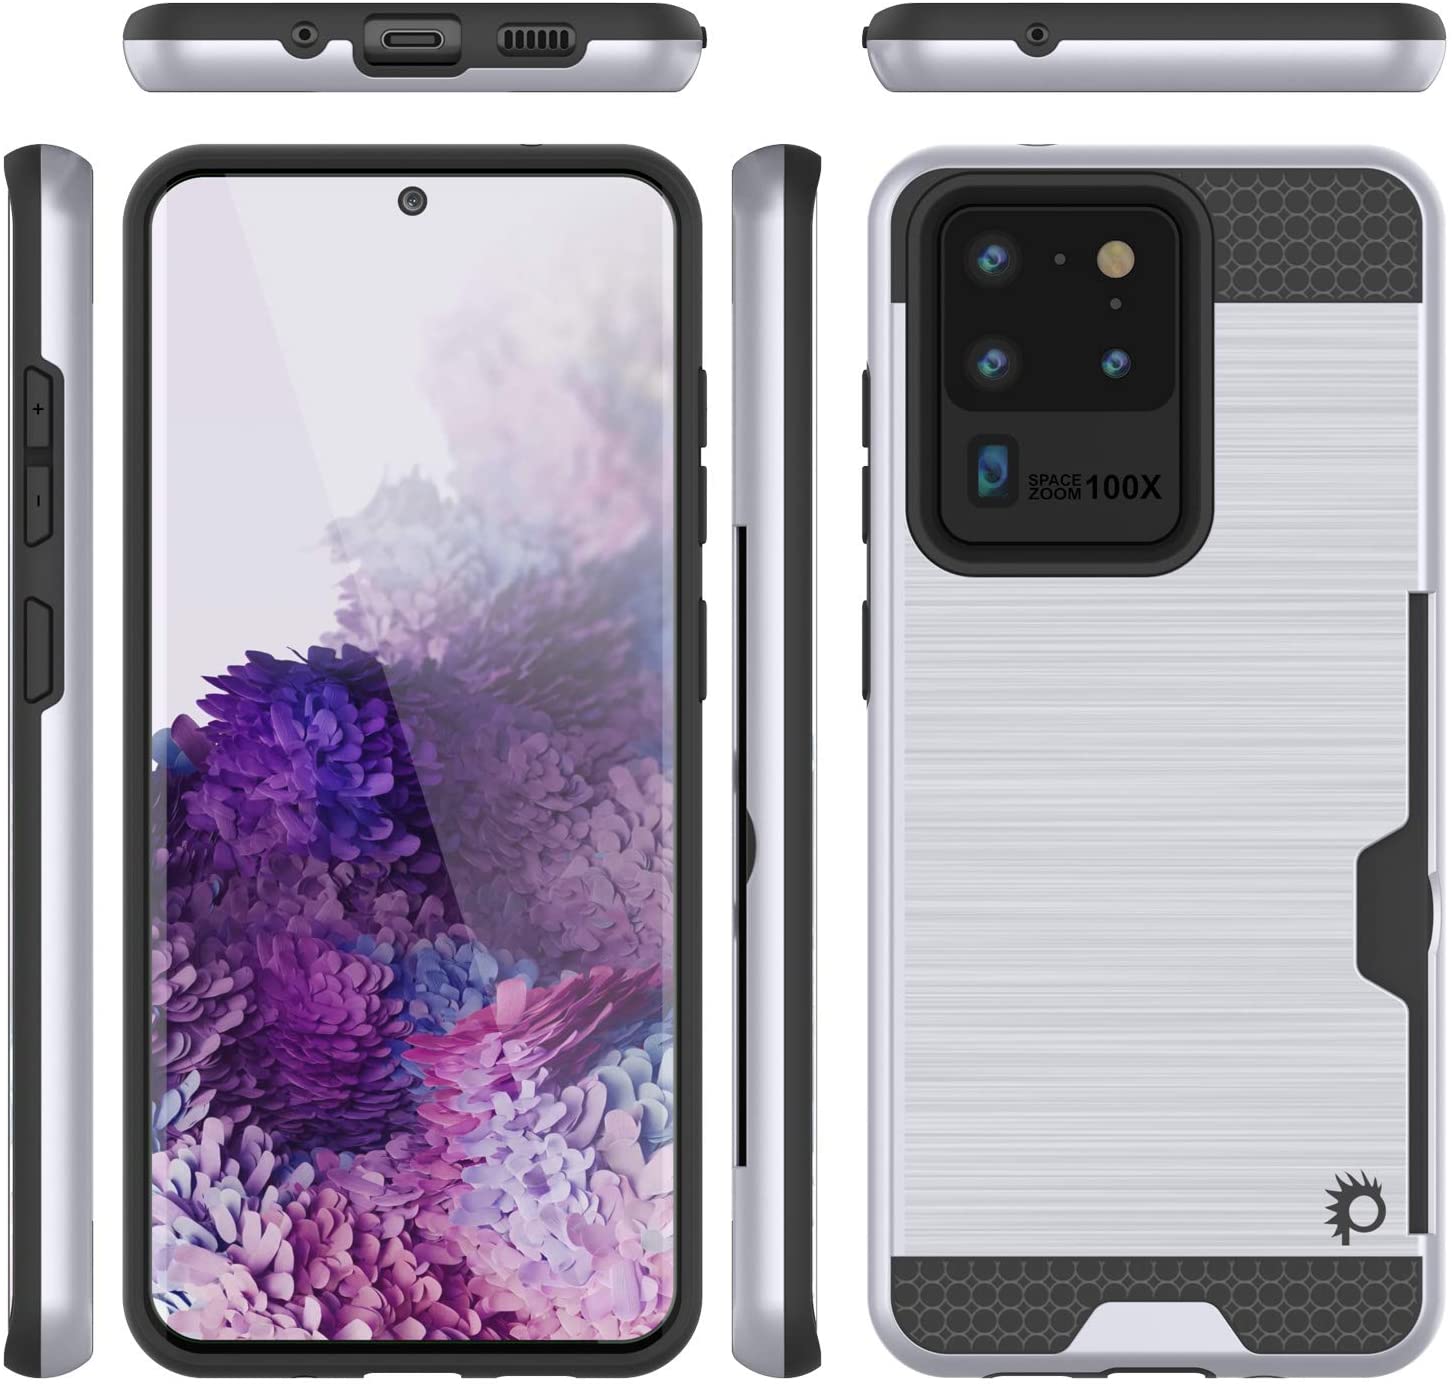 Galaxy S20 Ultra Case, PUNKcase [SLOT Series] [Slim Fit] Dual-Layer Armor Cover w/Integrated Anti-Shock System, Credit Card Slot [White]